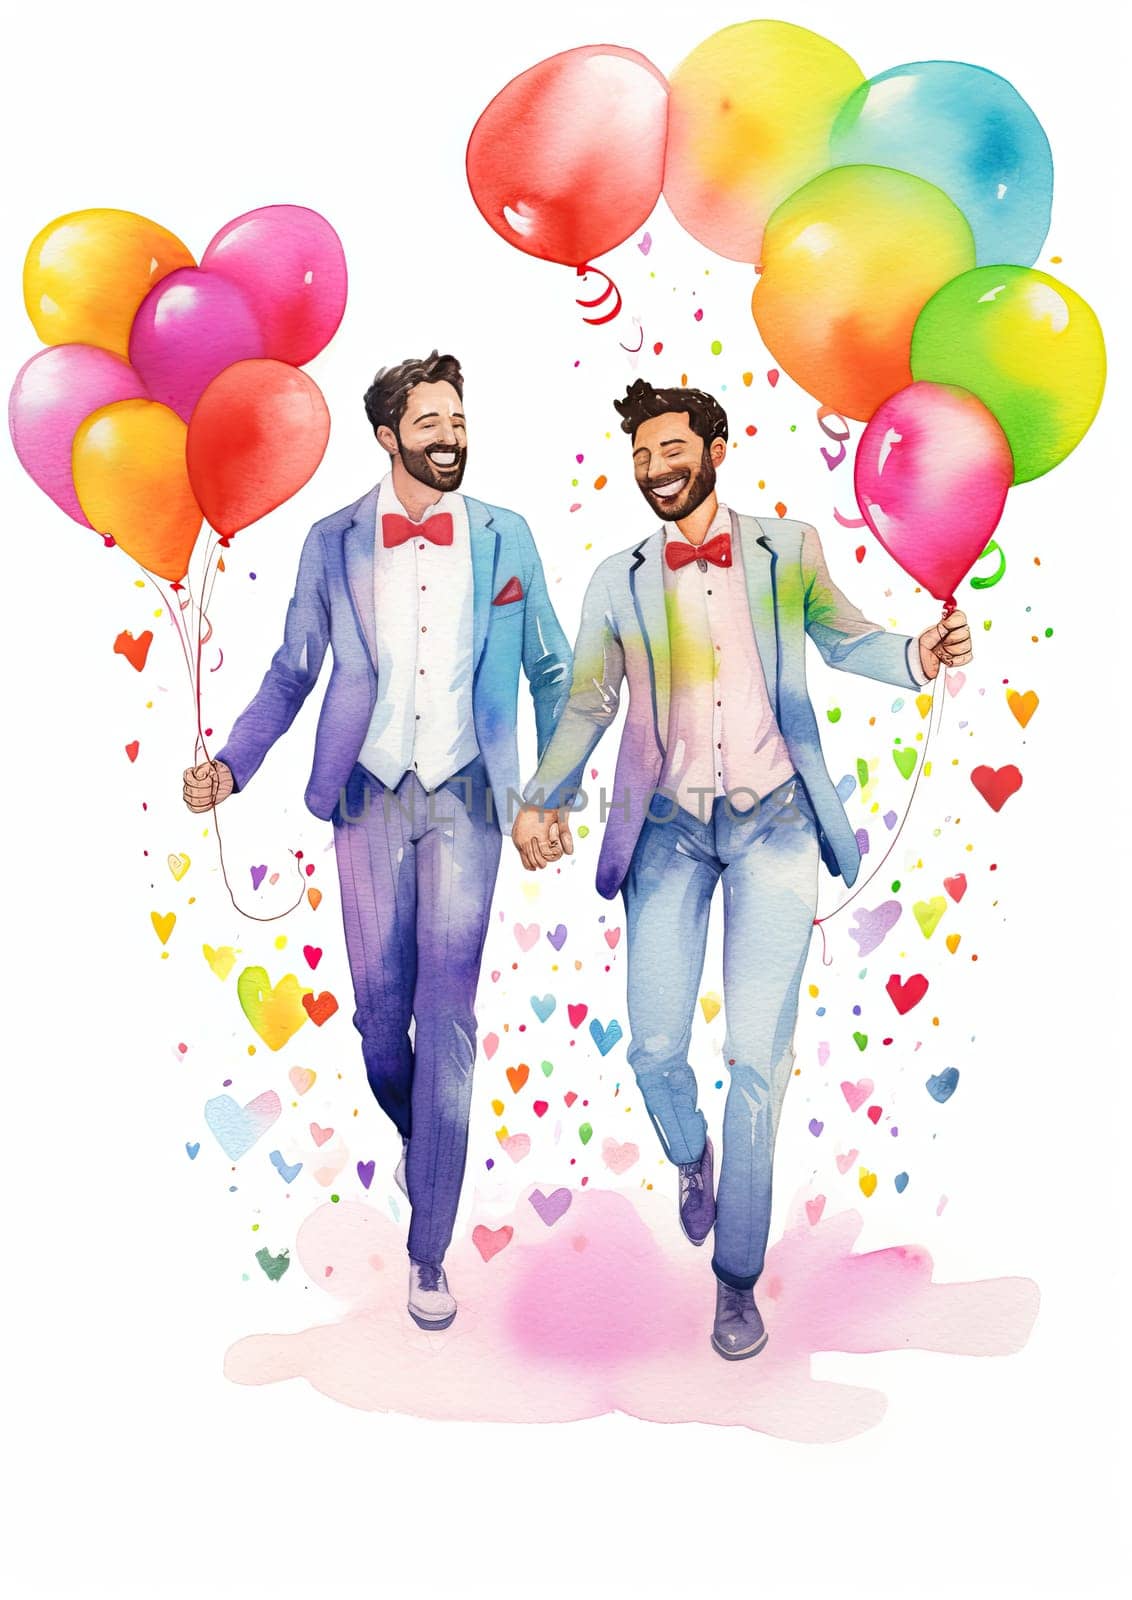 Illustration of two gay men holding hands and smiling with colorful balloons isolated on white background by papatonic